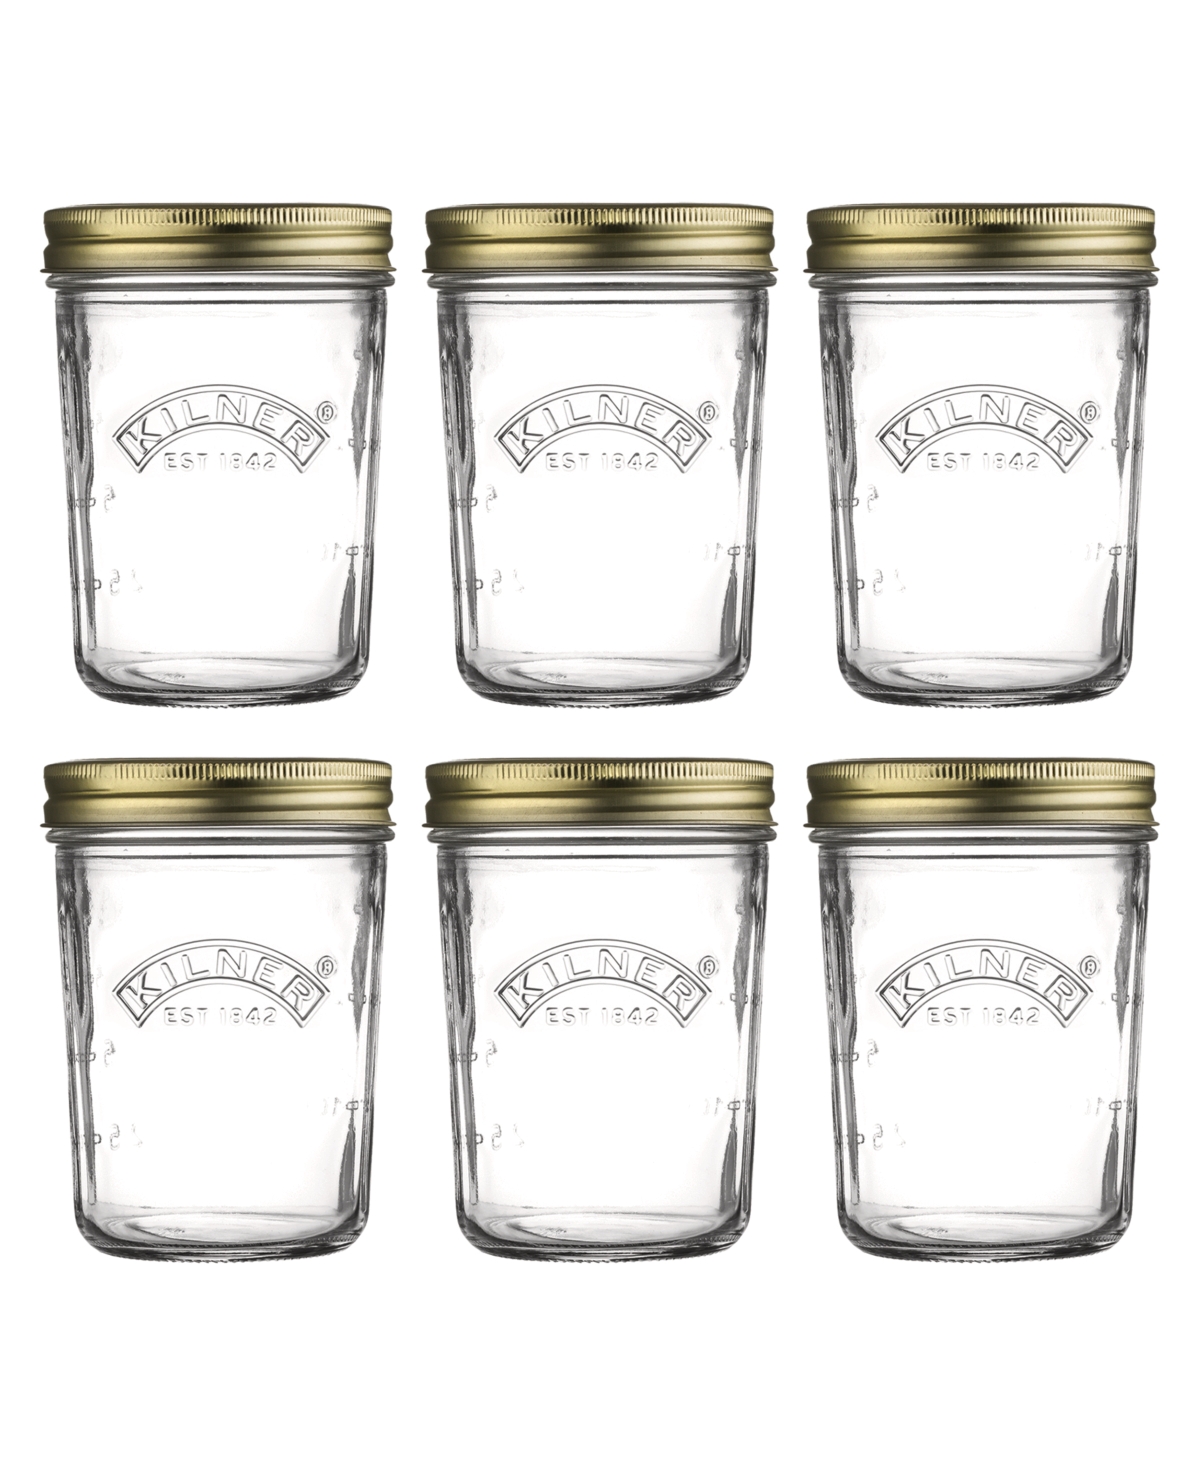 Wide Mouth Canning Jar 12 oz, Set of 6 - Clear